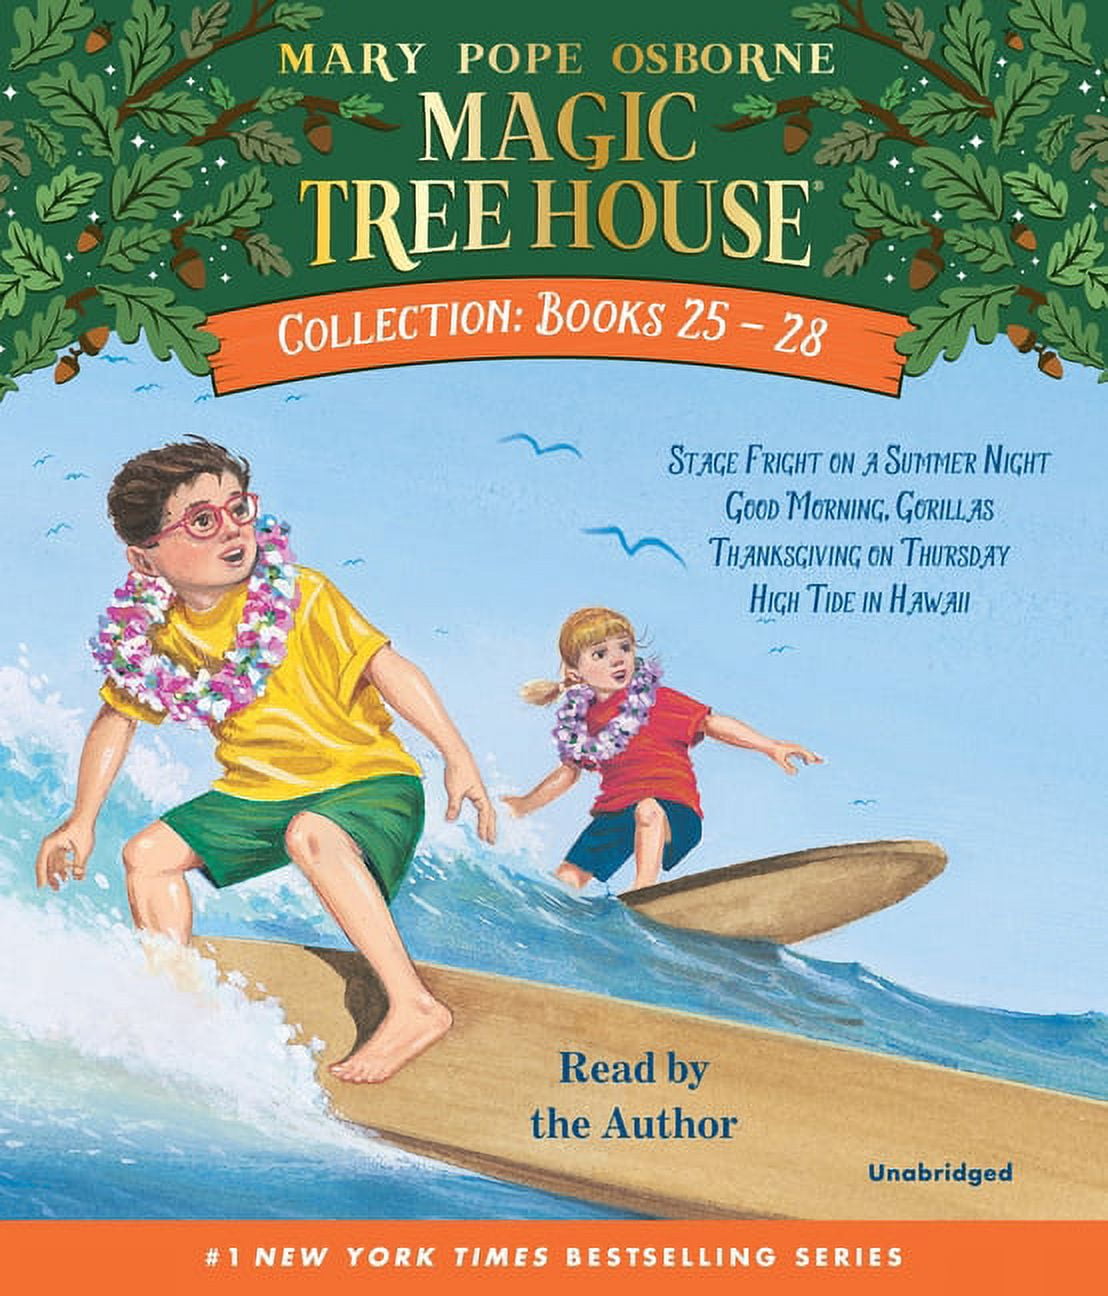 Thanksgiving　Collection:　Summer　Magic　a　House　in　Thursday;　Morning,　Good　25-28:　Tide　Gorillas;　on　High　on　#28　Books　Stage　#25　#27　#26　Night;　Fright　Tree　Hawaii